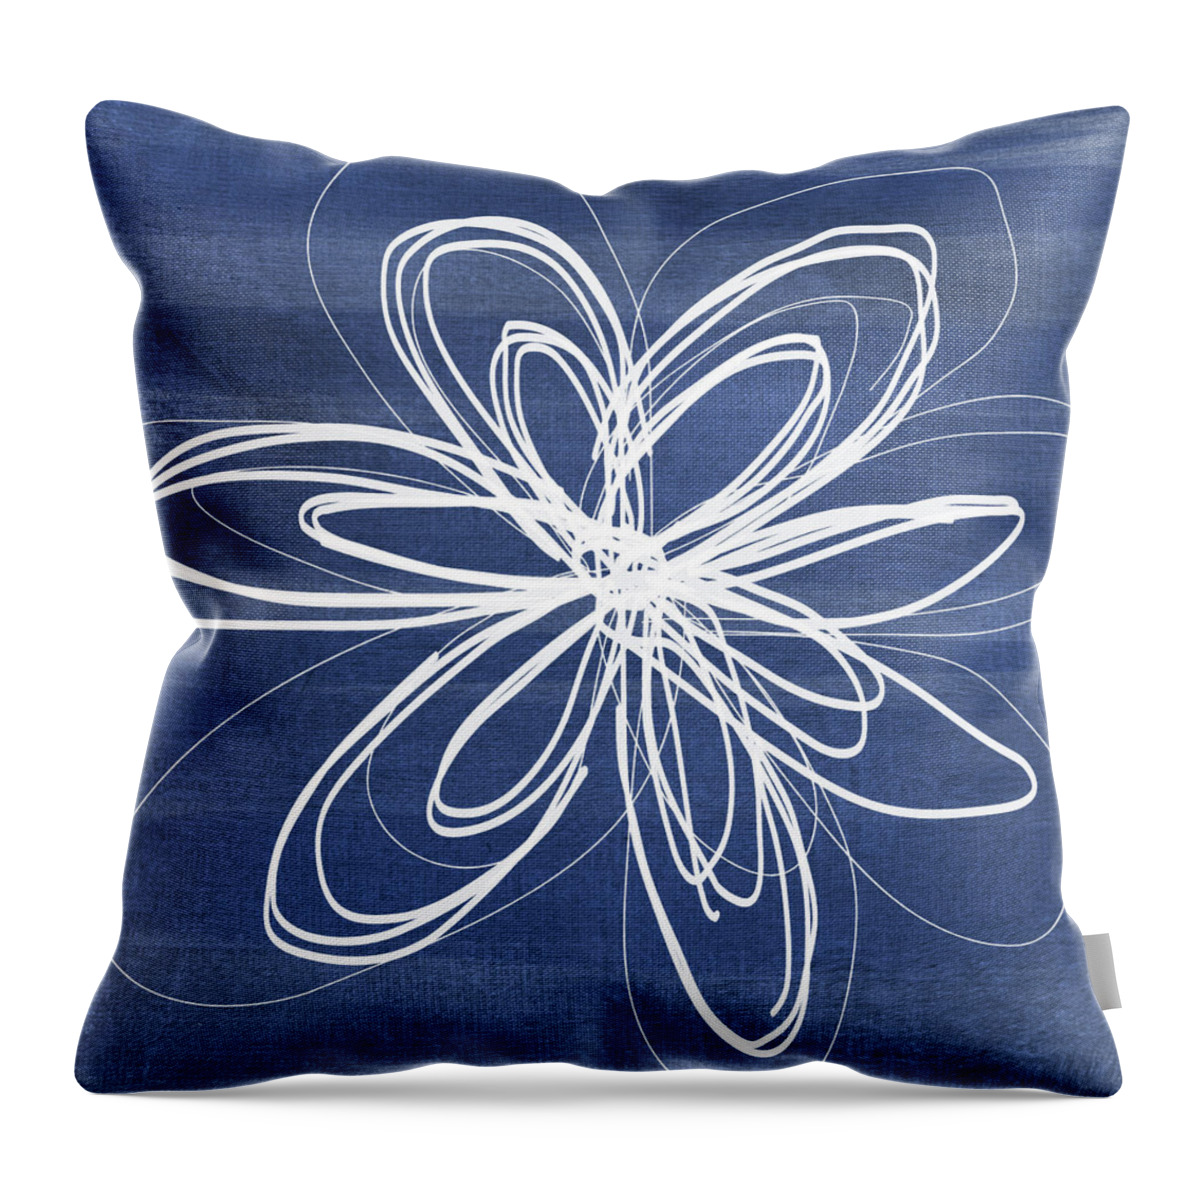 Indigo Throw Pillow featuring the mixed media Indigo and White Flower- Art by Linda Woods by Linda Woods